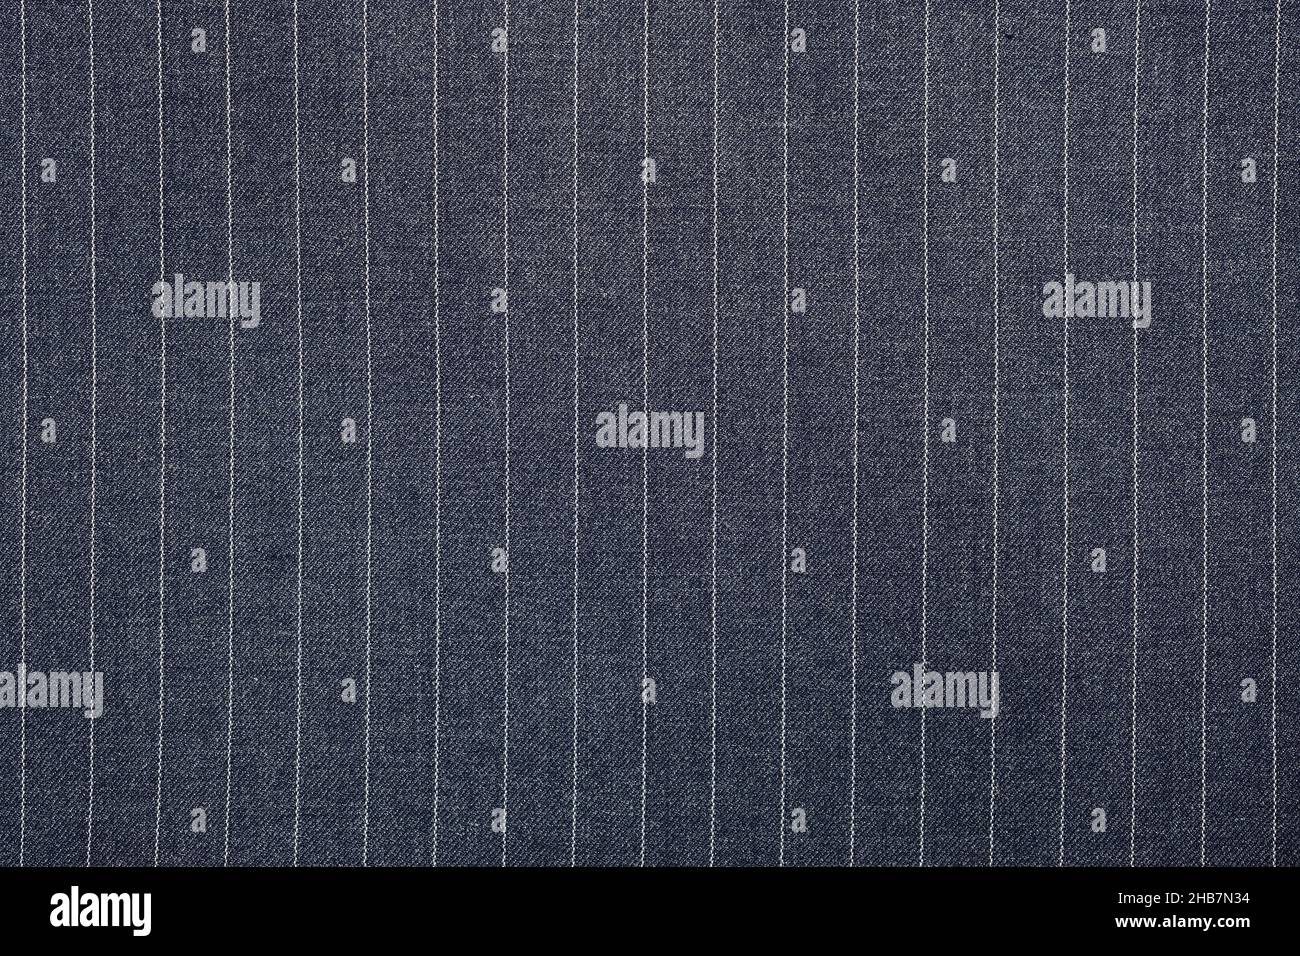 Top View of Pinstripe Texture Background Stock Photo - Alamy